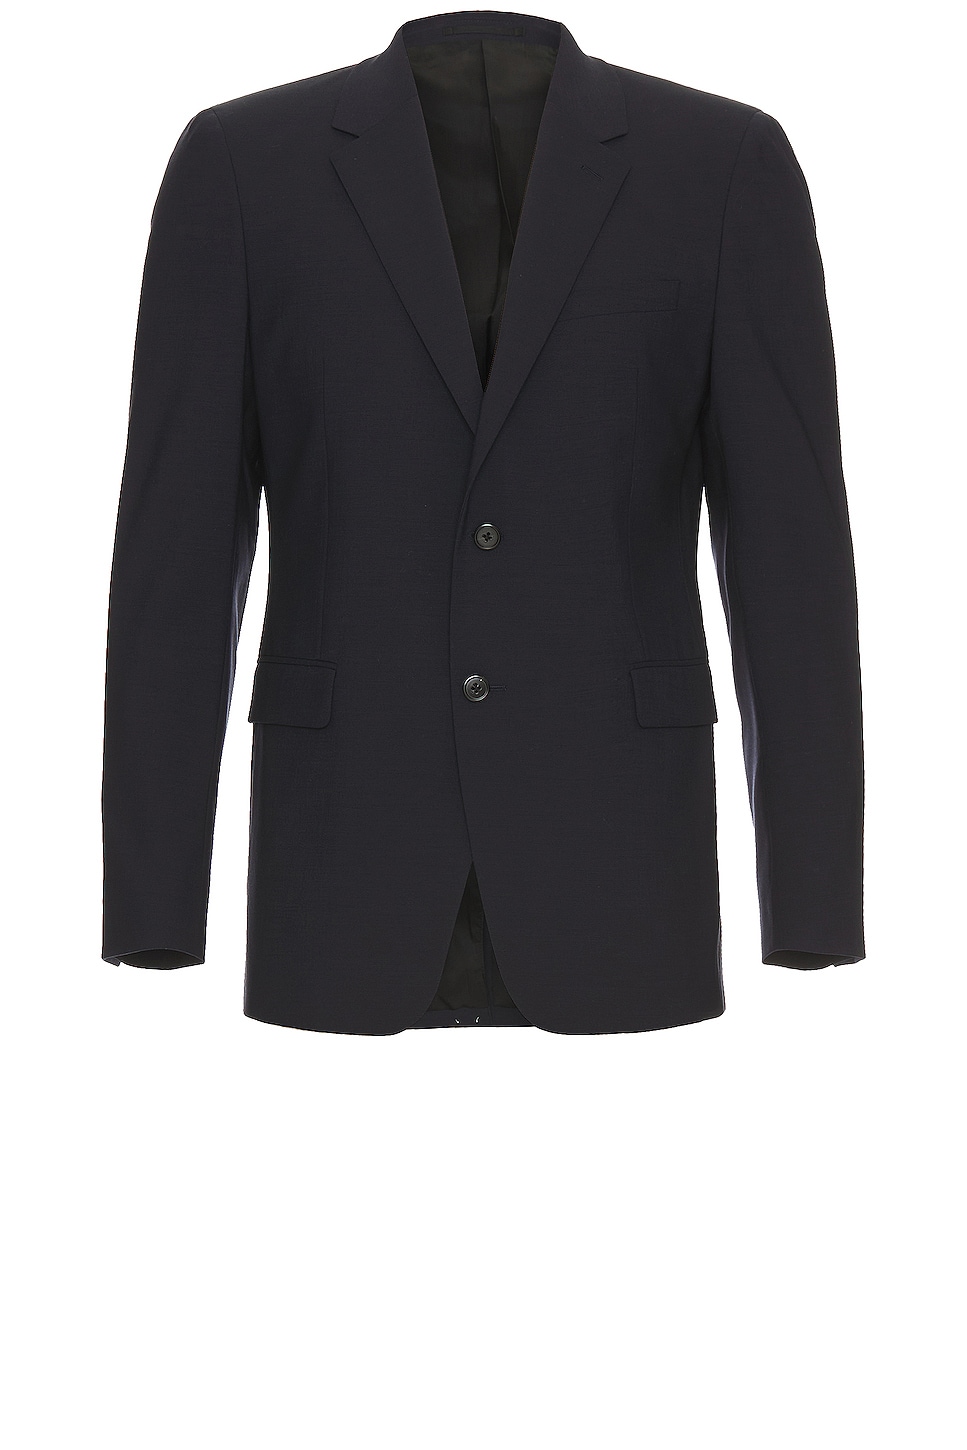 Image 1 of Theory Chambers Suit in Navy